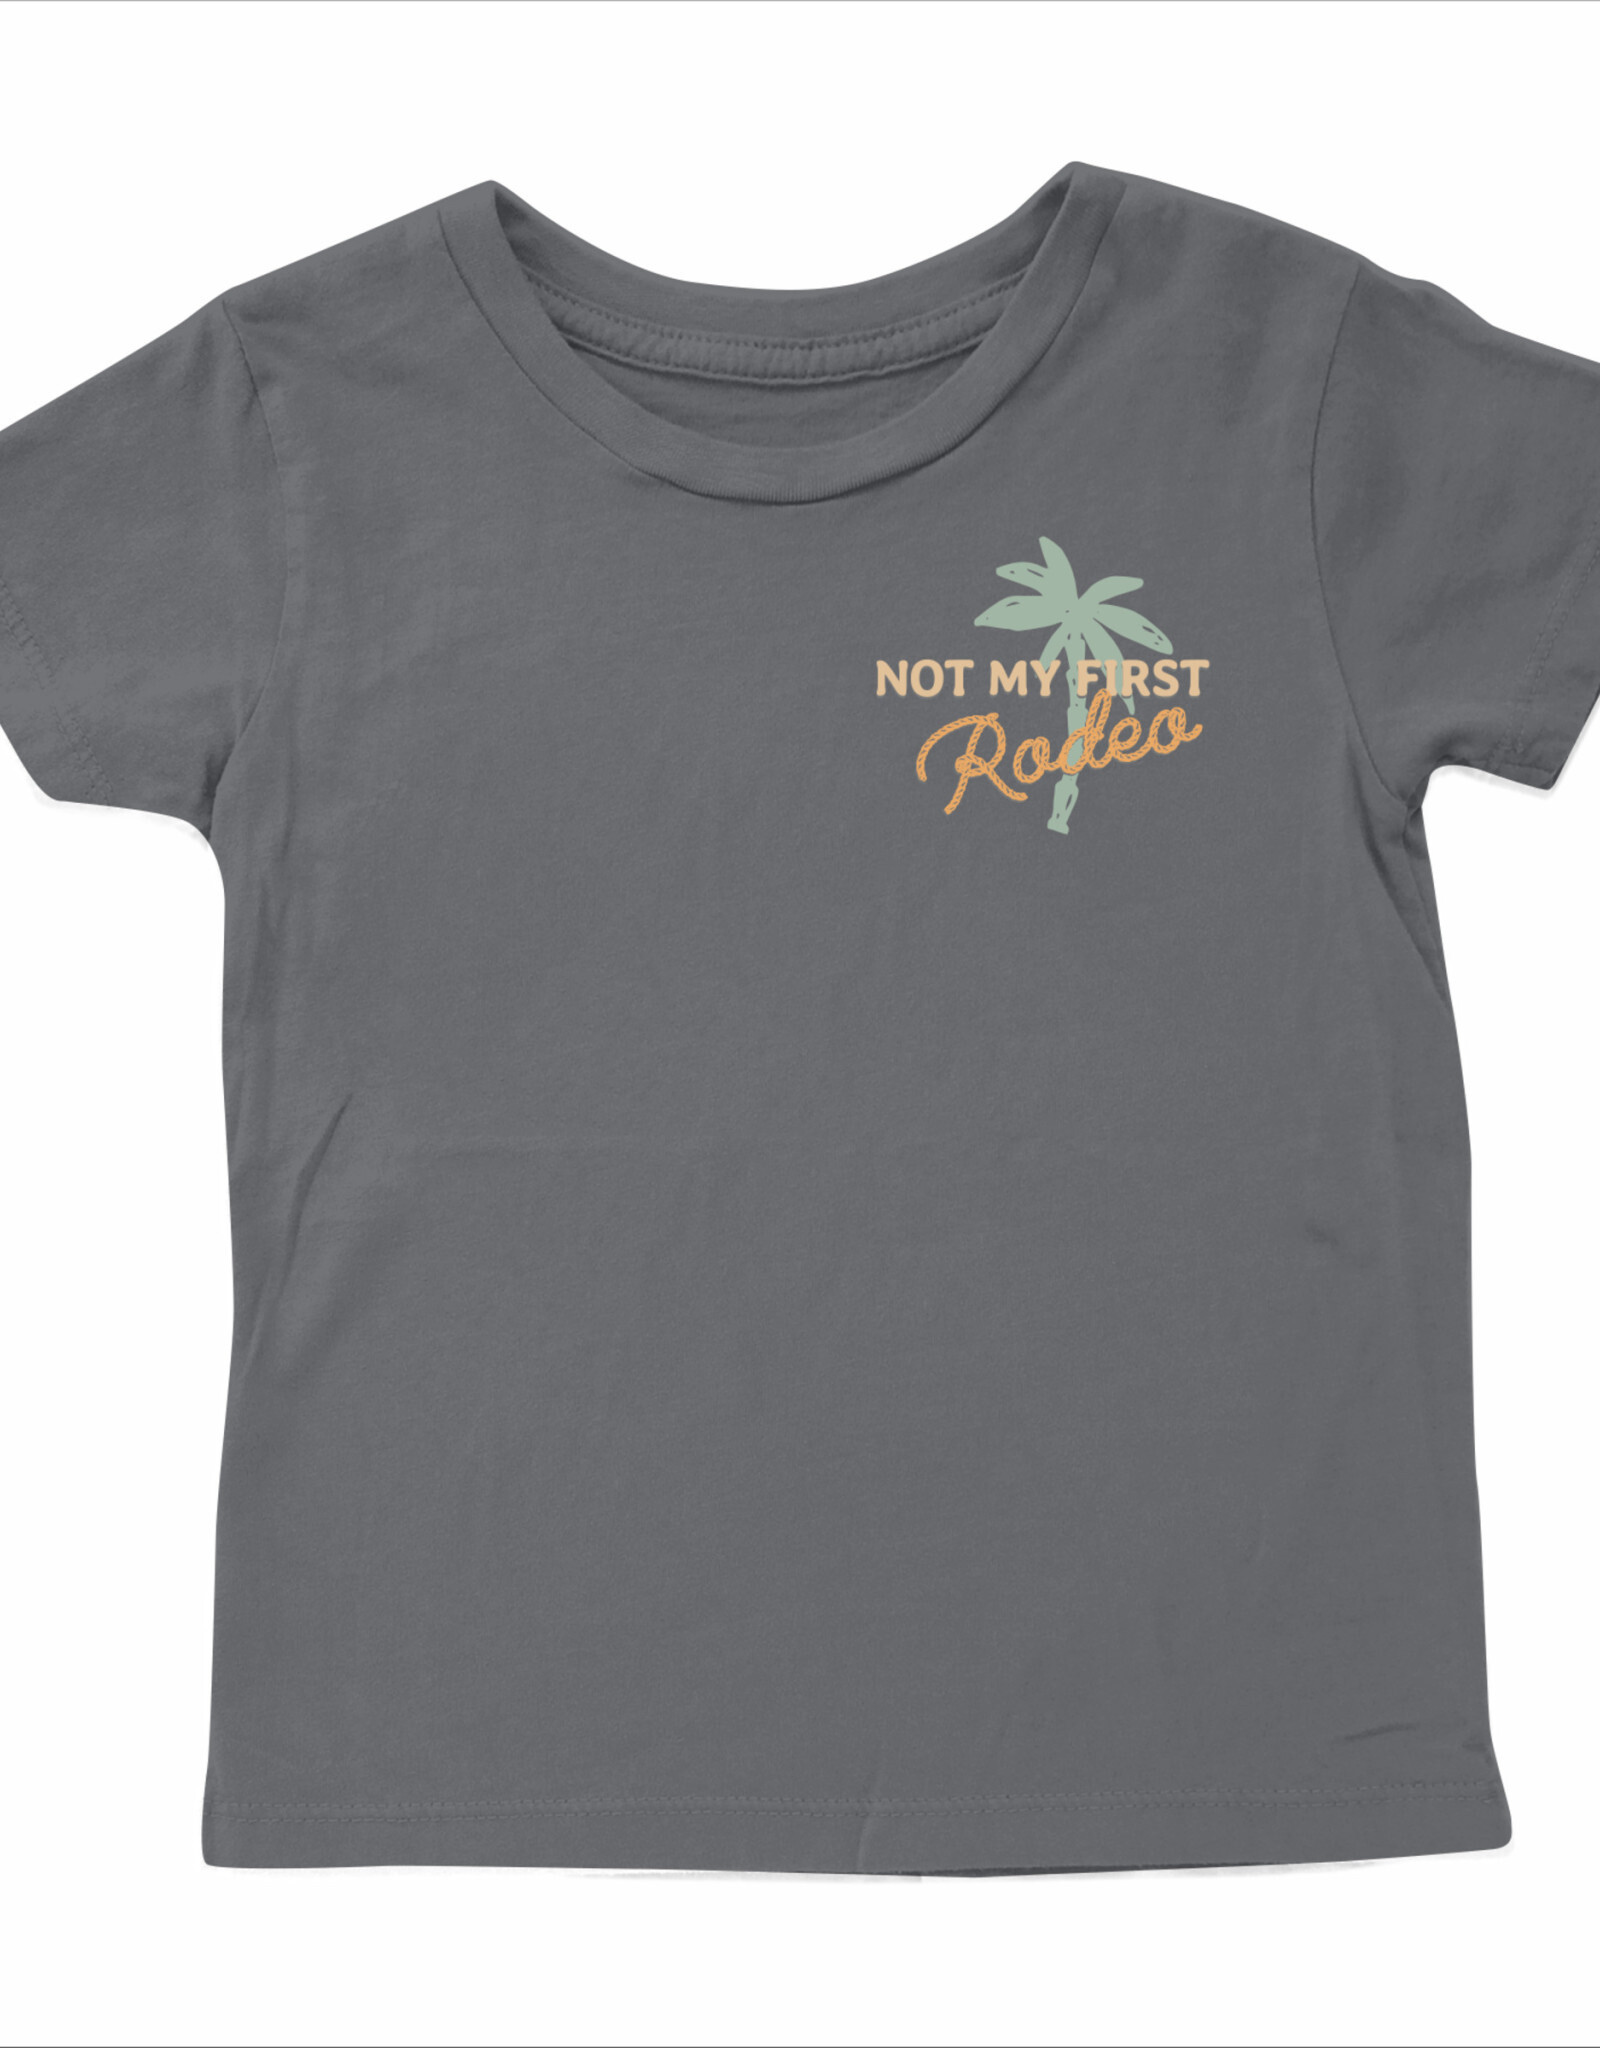 Tiny Whales not my first rodeo tee- black